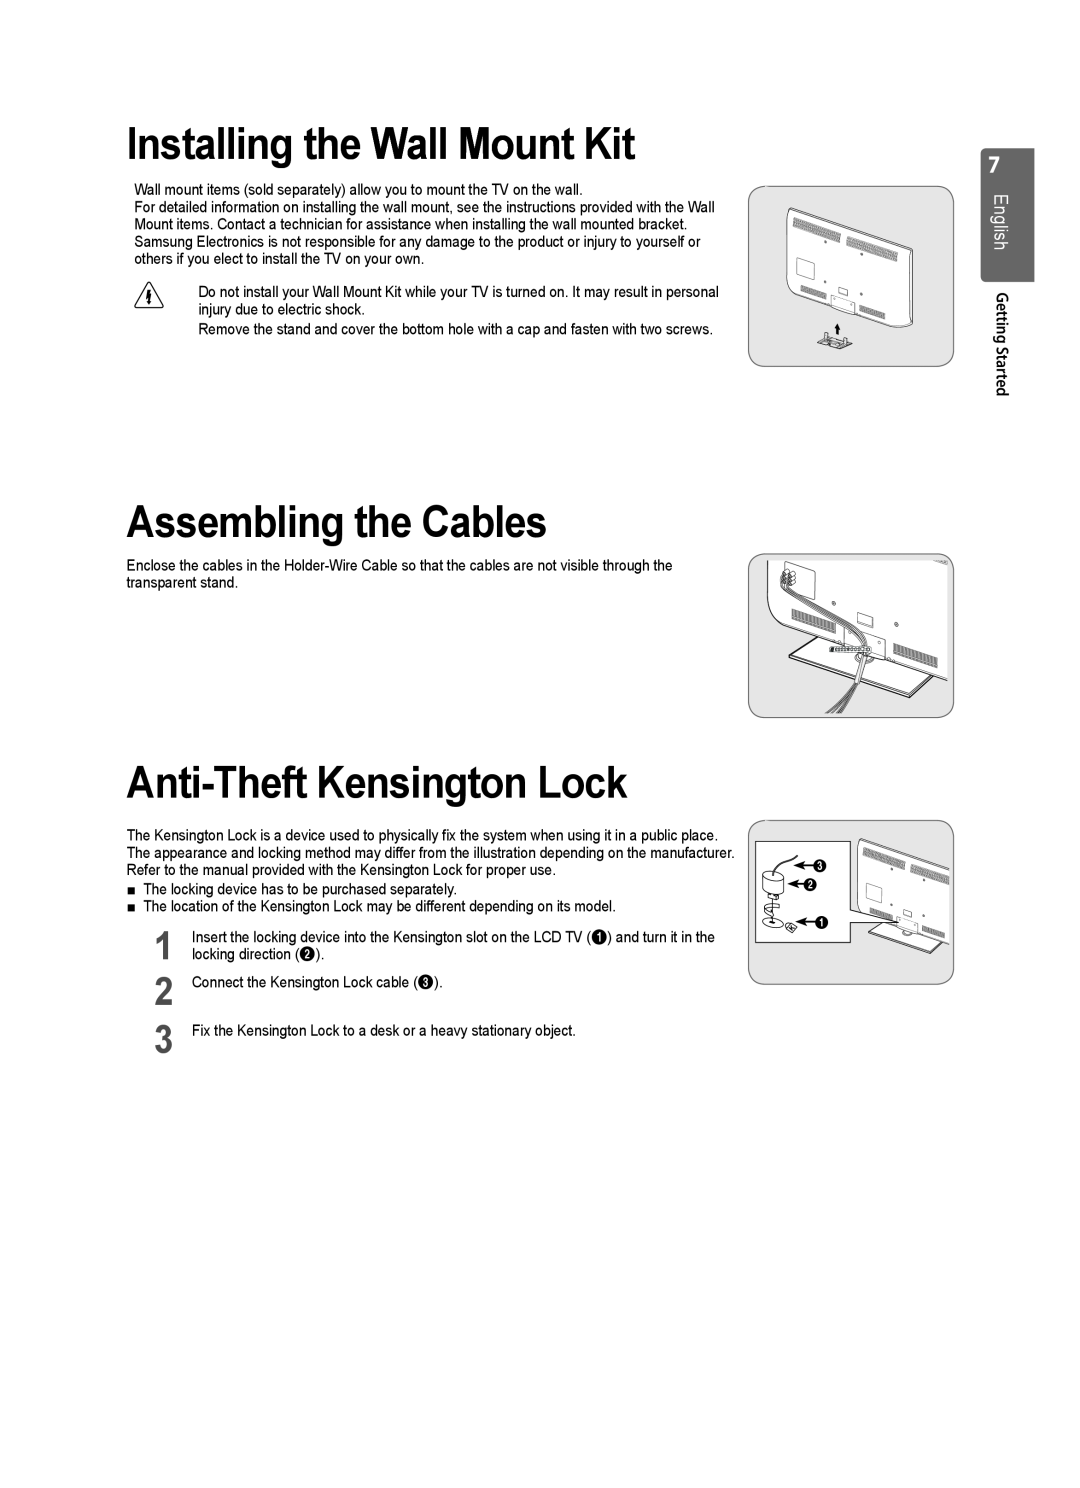 Samsung LE46B554 Installing the Wall Mount Kit, Assembling the Cables, Anti-Theft Kensington Lock, English Getting Started 